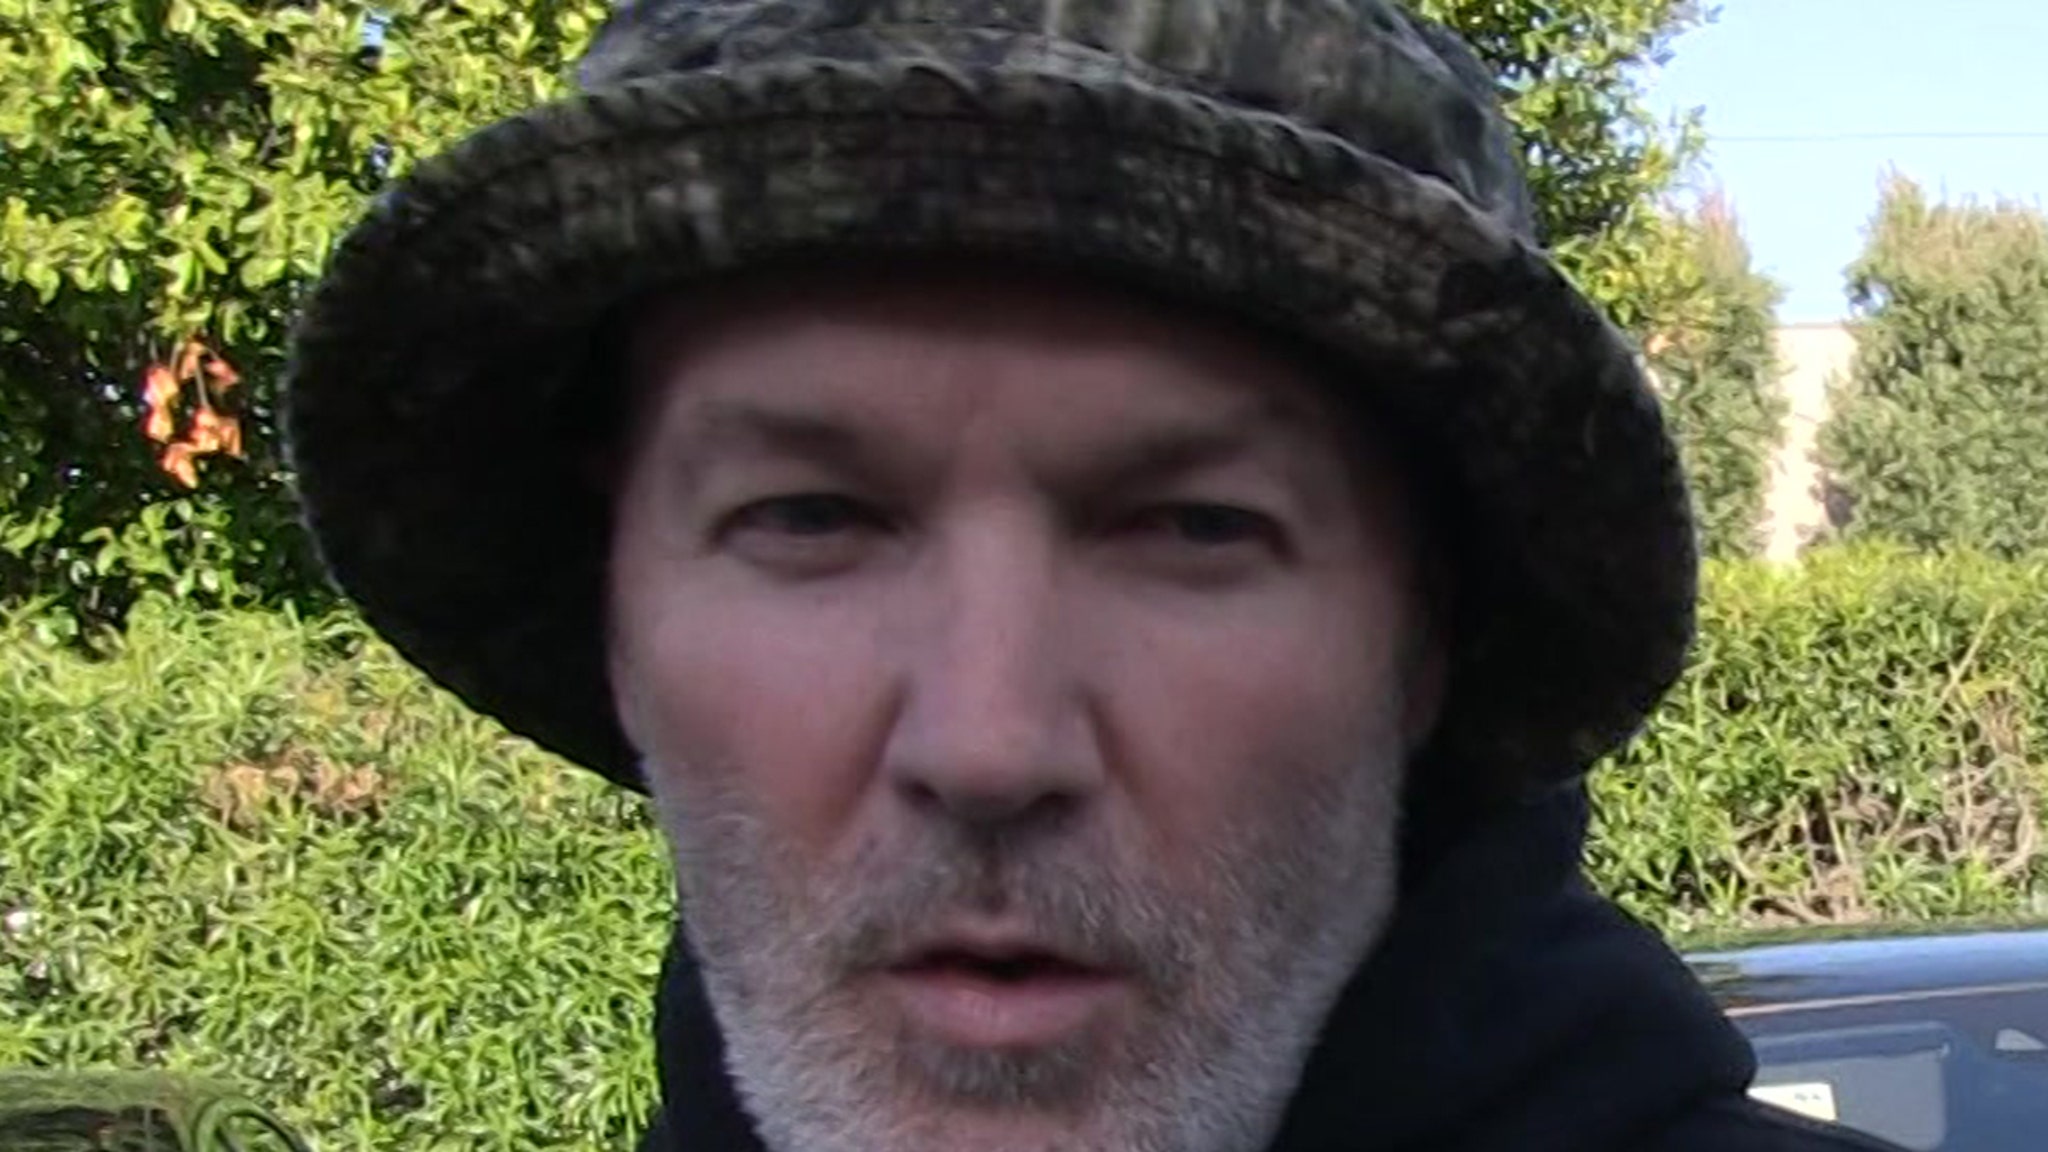 IT HURT WHEN THE YANKEES SUED ME.” THE FRED DURST INTERVIEW PT. 2 – 100%  NEWS